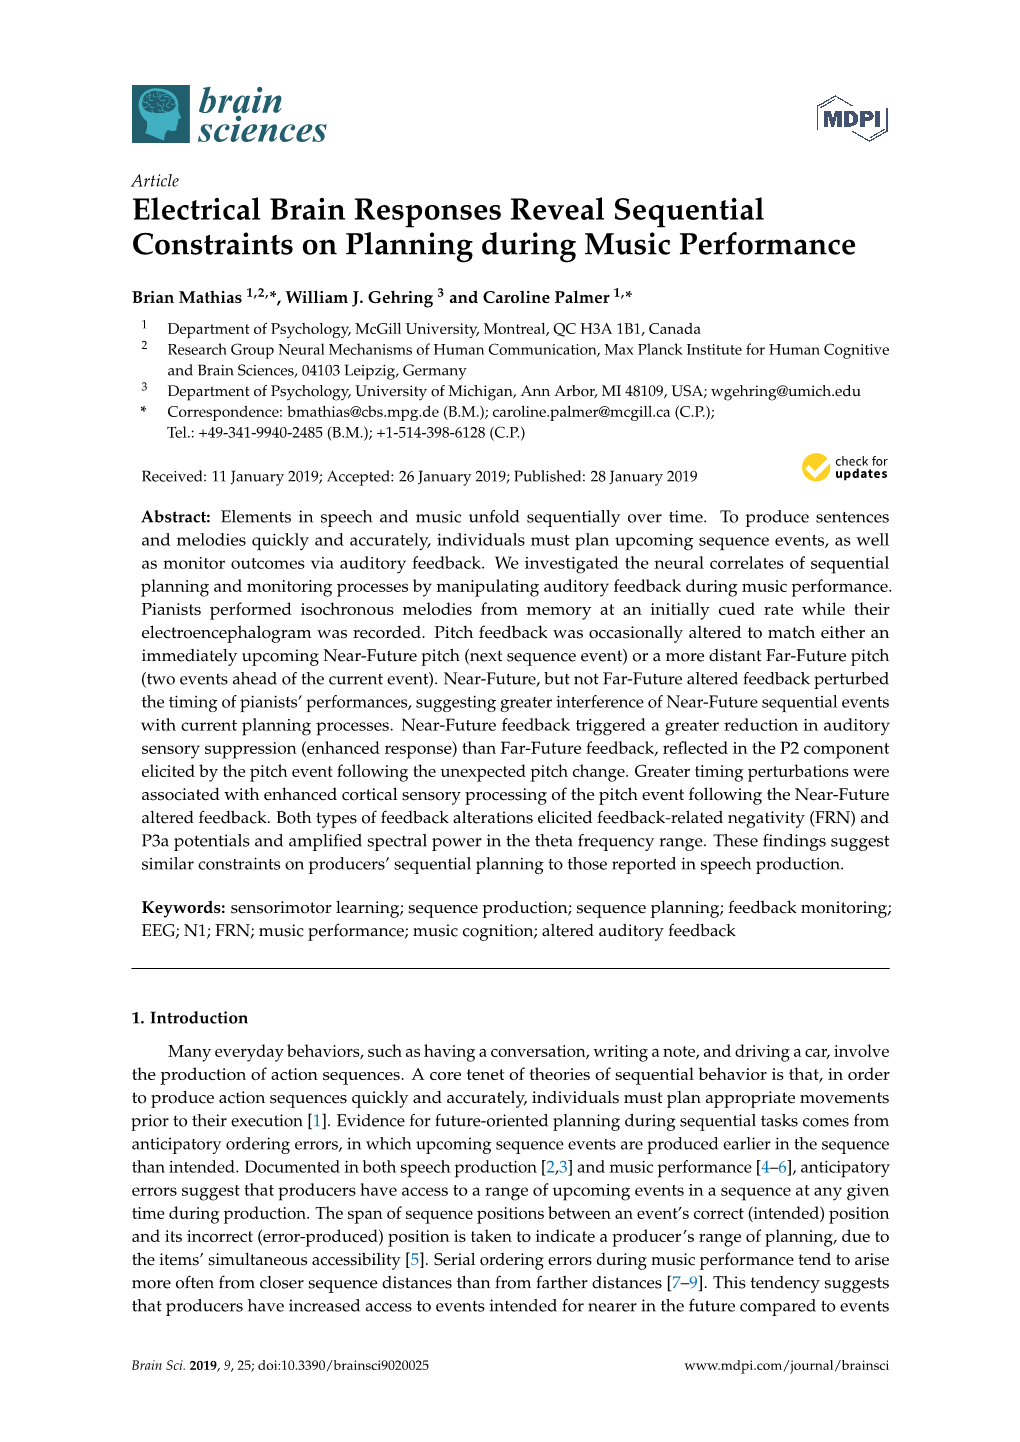 Electrical Brain Responses Reveal Sequential Constraints on Planning During Music Performance